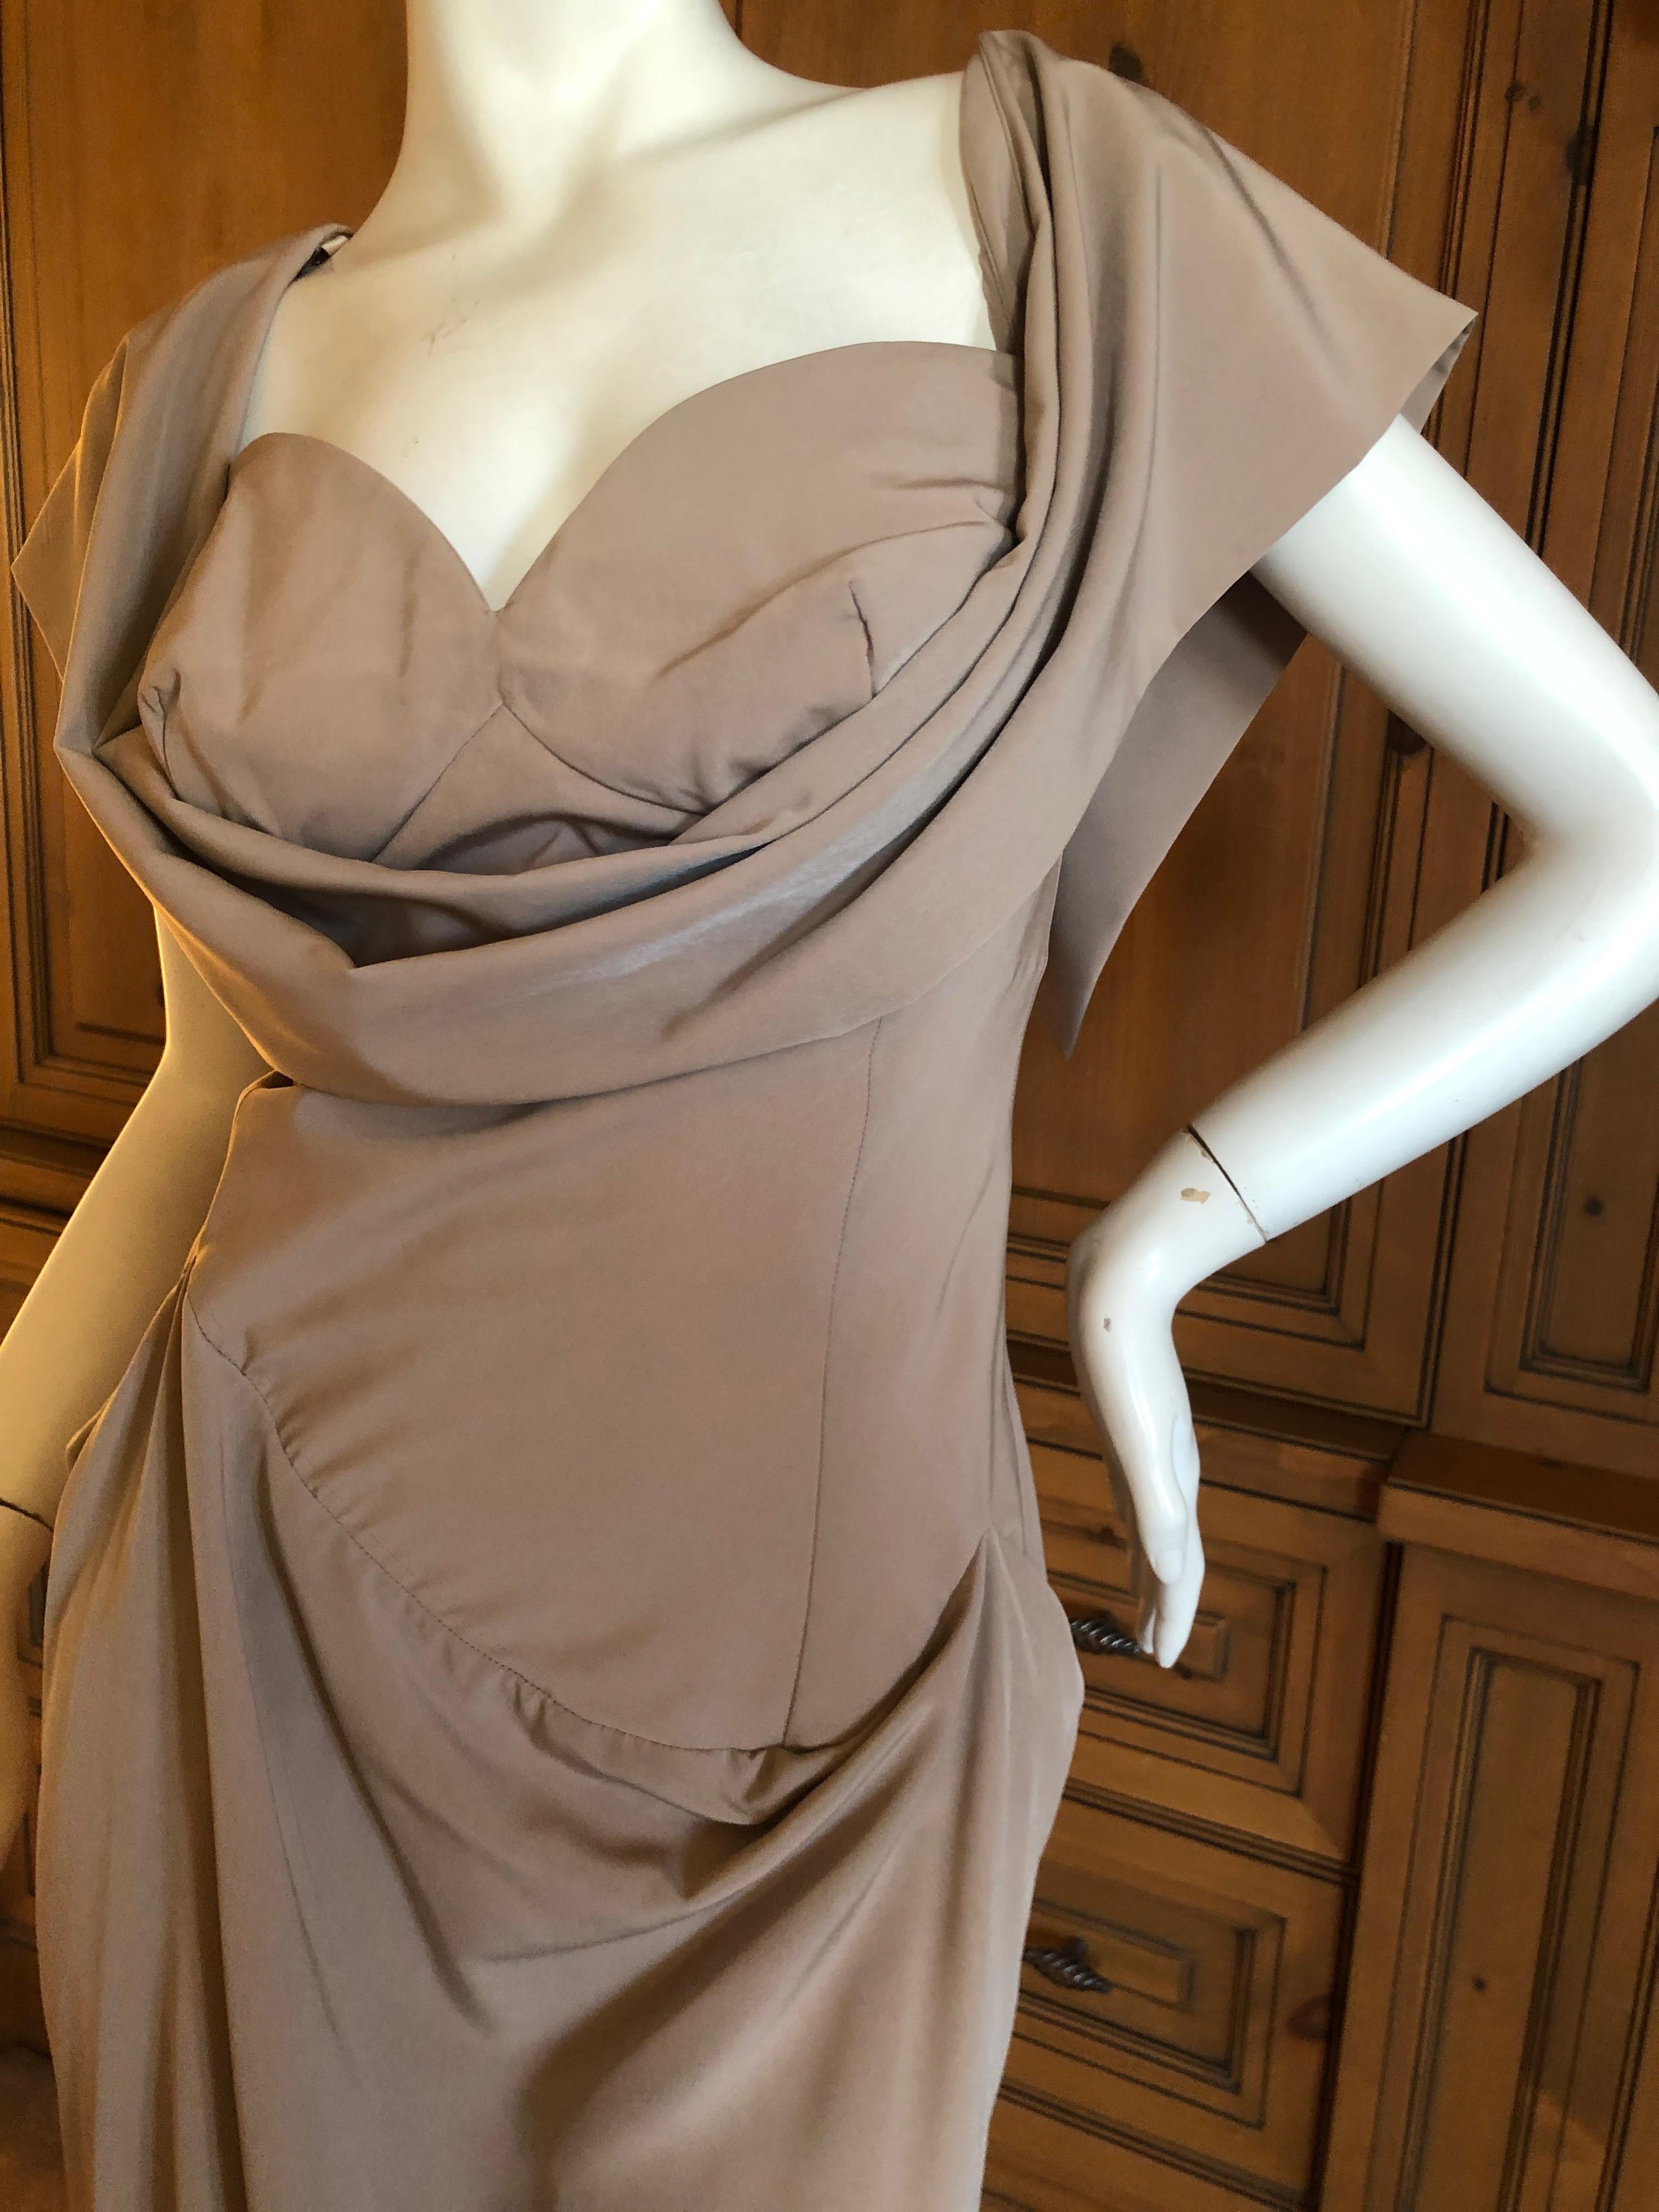 Vivienne Westwood Vintage Red Label Drape Front Dress Size 40 UK In Excellent Condition For Sale In Cloverdale, CA